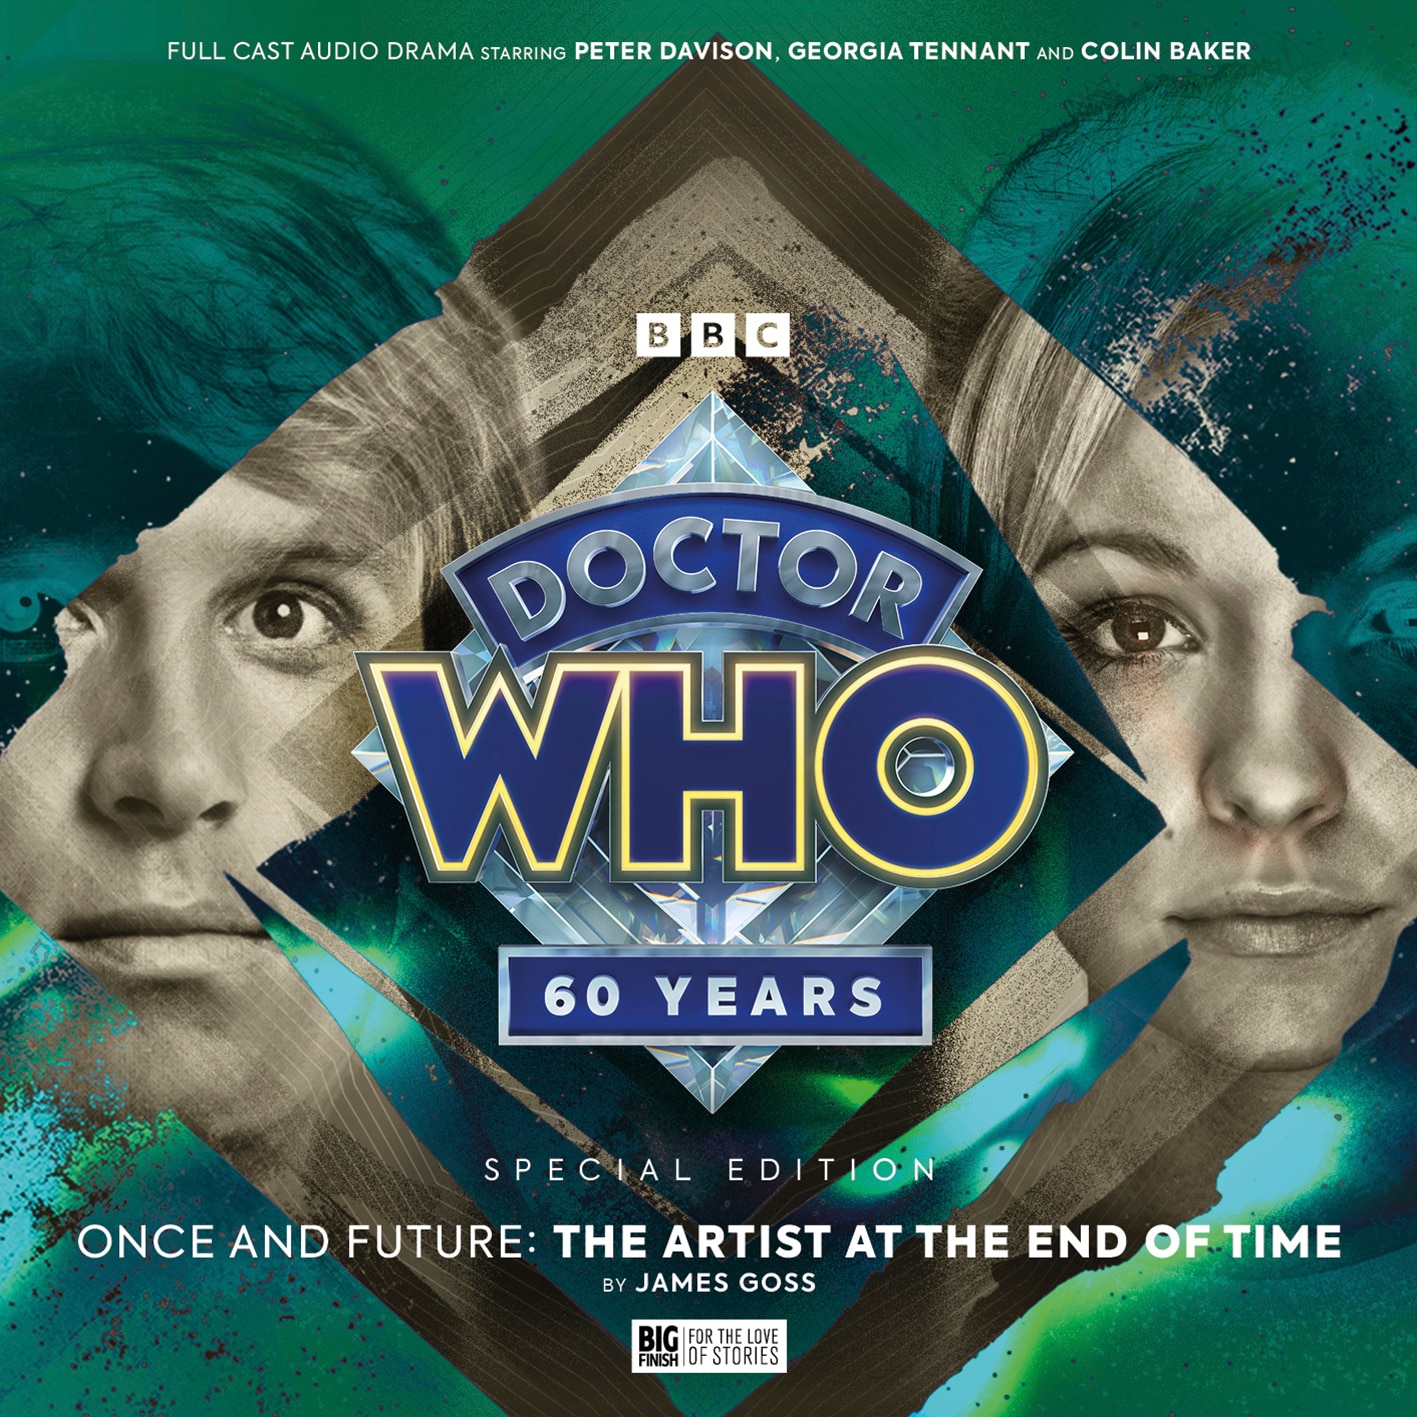 Doctor Who - Once and Future_ The Artist at the End of Time Special Edition (Final)-0c2303535e.jpg